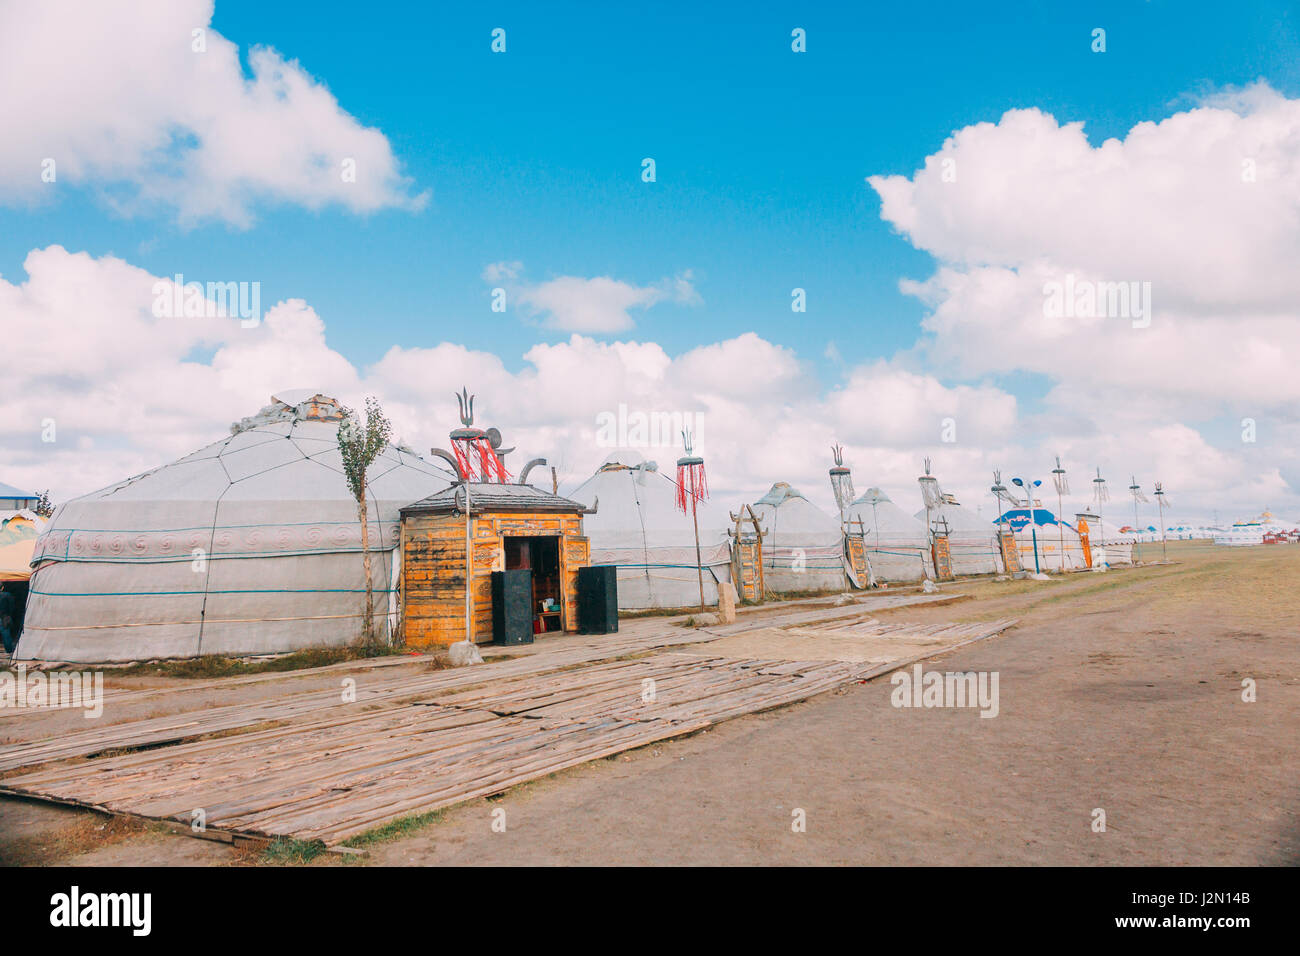 Landscapes of Mongolia, yurts against the backdrop of blue sky Stock Photo